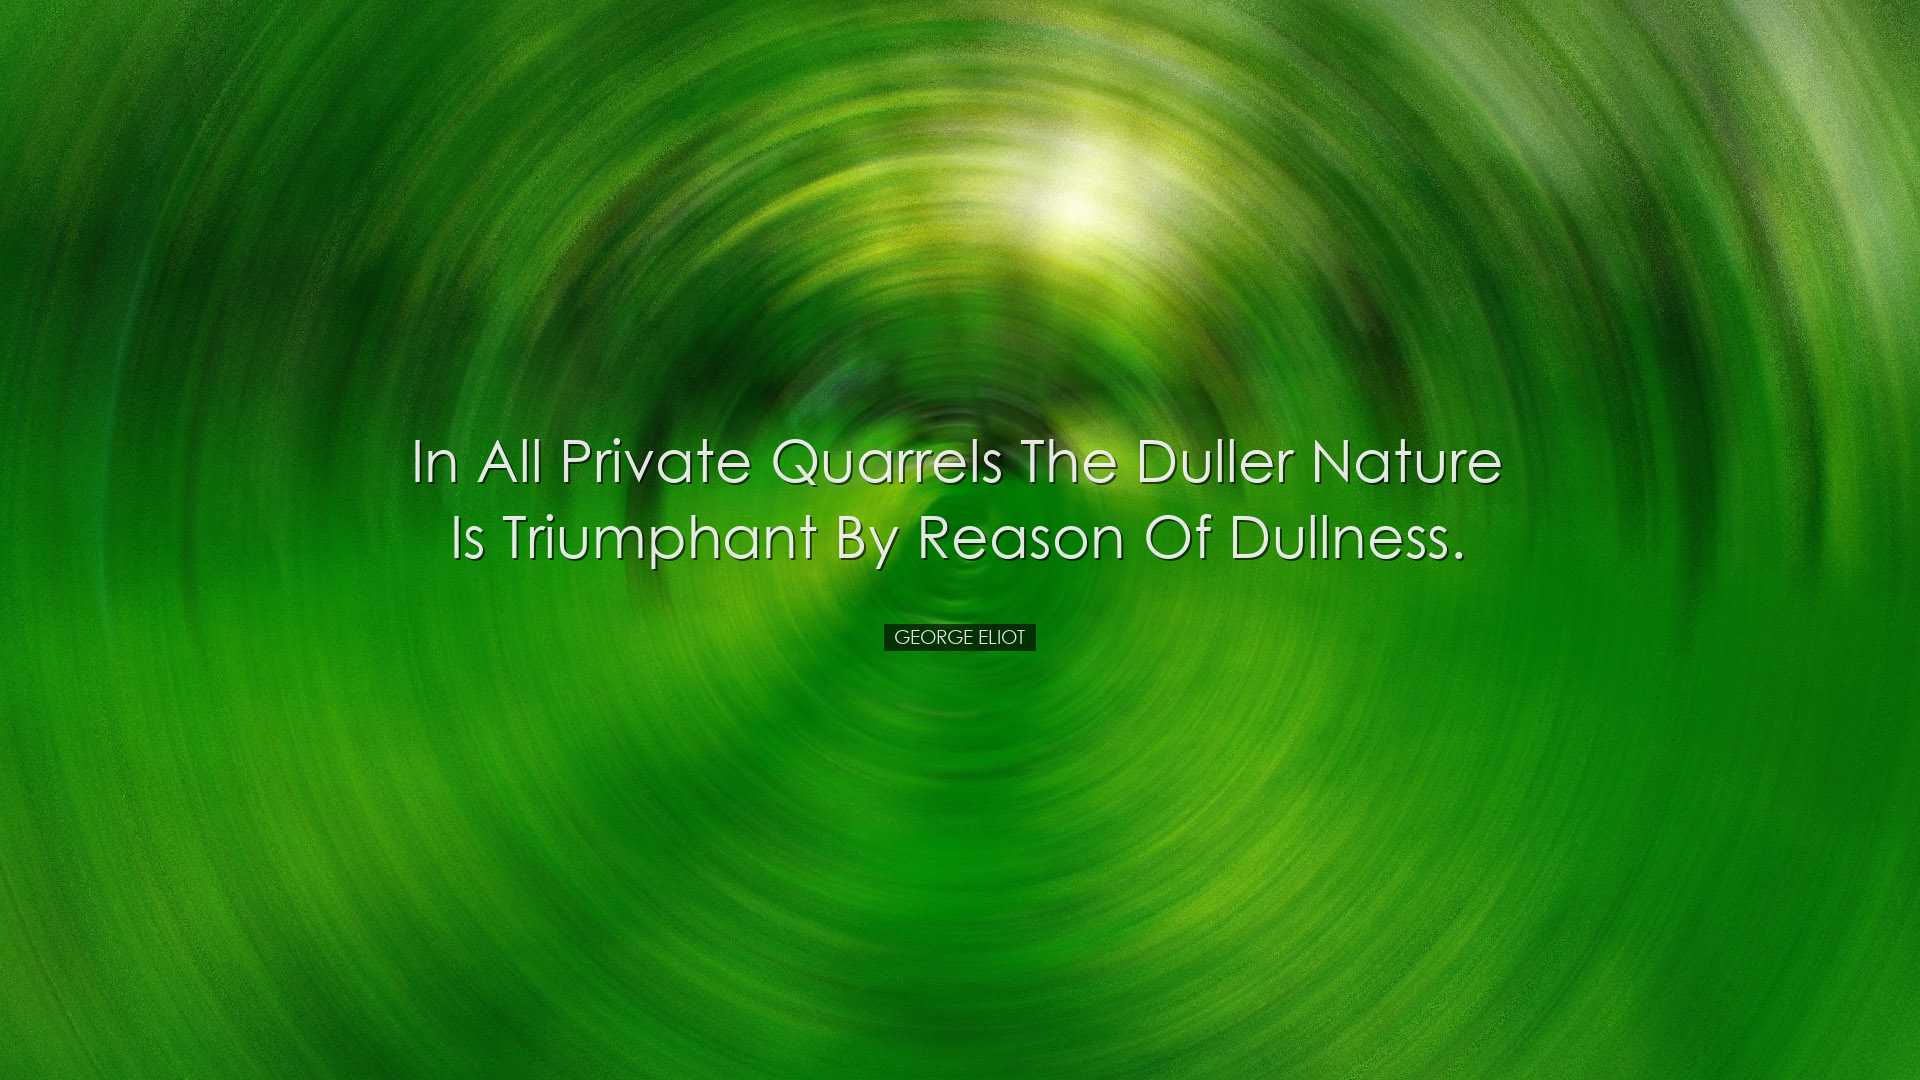 In all private quarrels the duller nature is triumphant by reason